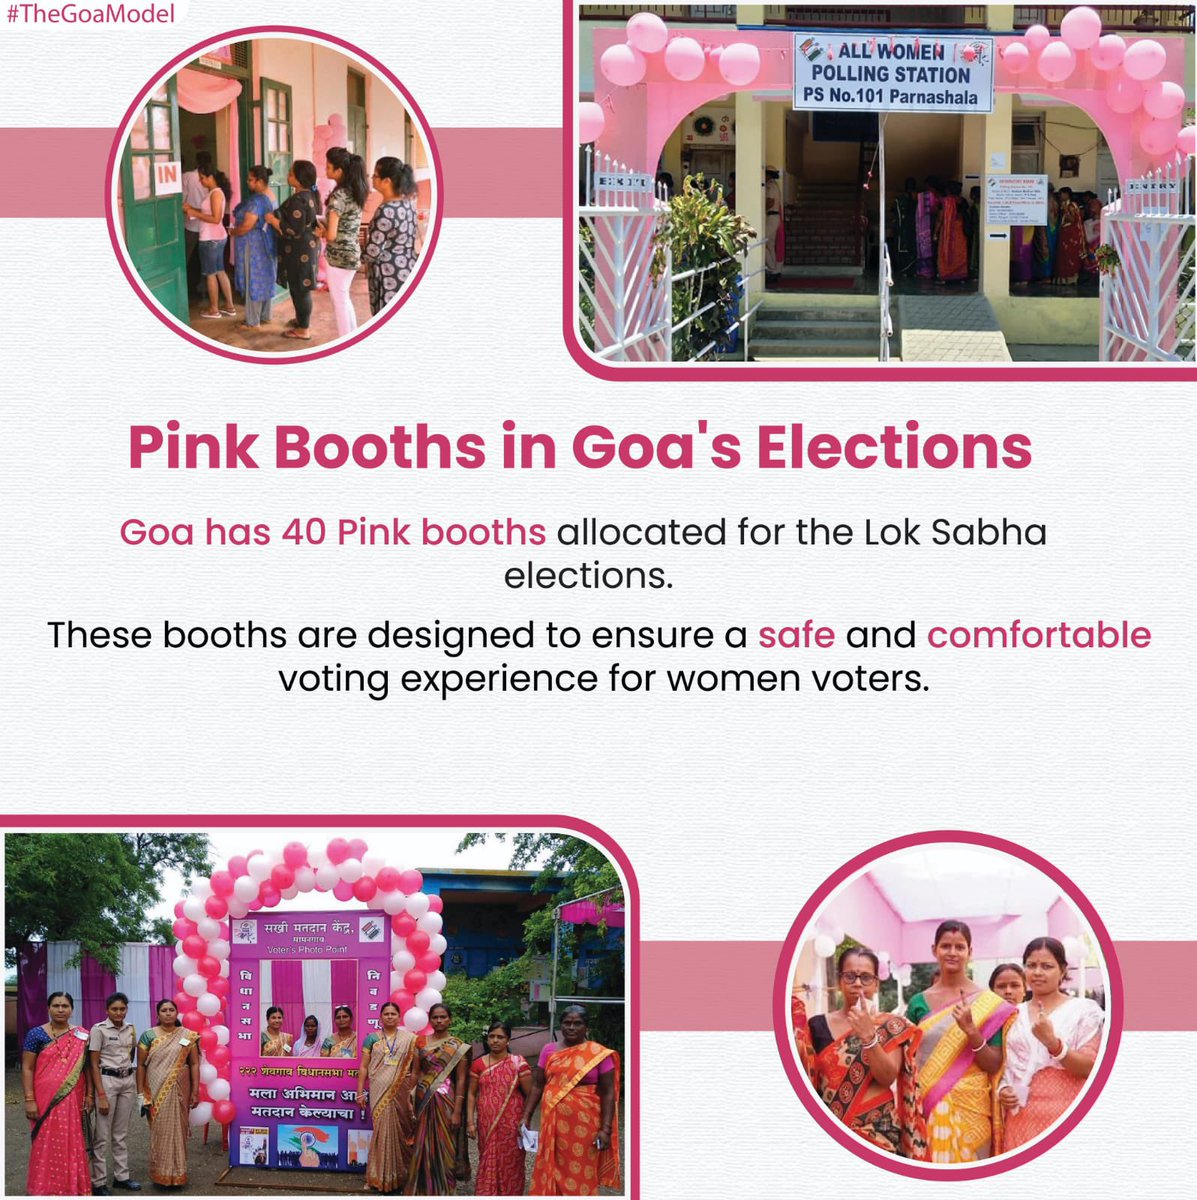 Goa gears up for Lok Sabha elections with 11,79,644 voters, including newly registered voters, PwD voters, and overseas voters. The state will have 80 Green booths and 40 Pink booths to facilitate smooth voting. Let's make our voices heard on election day! #GoaElections